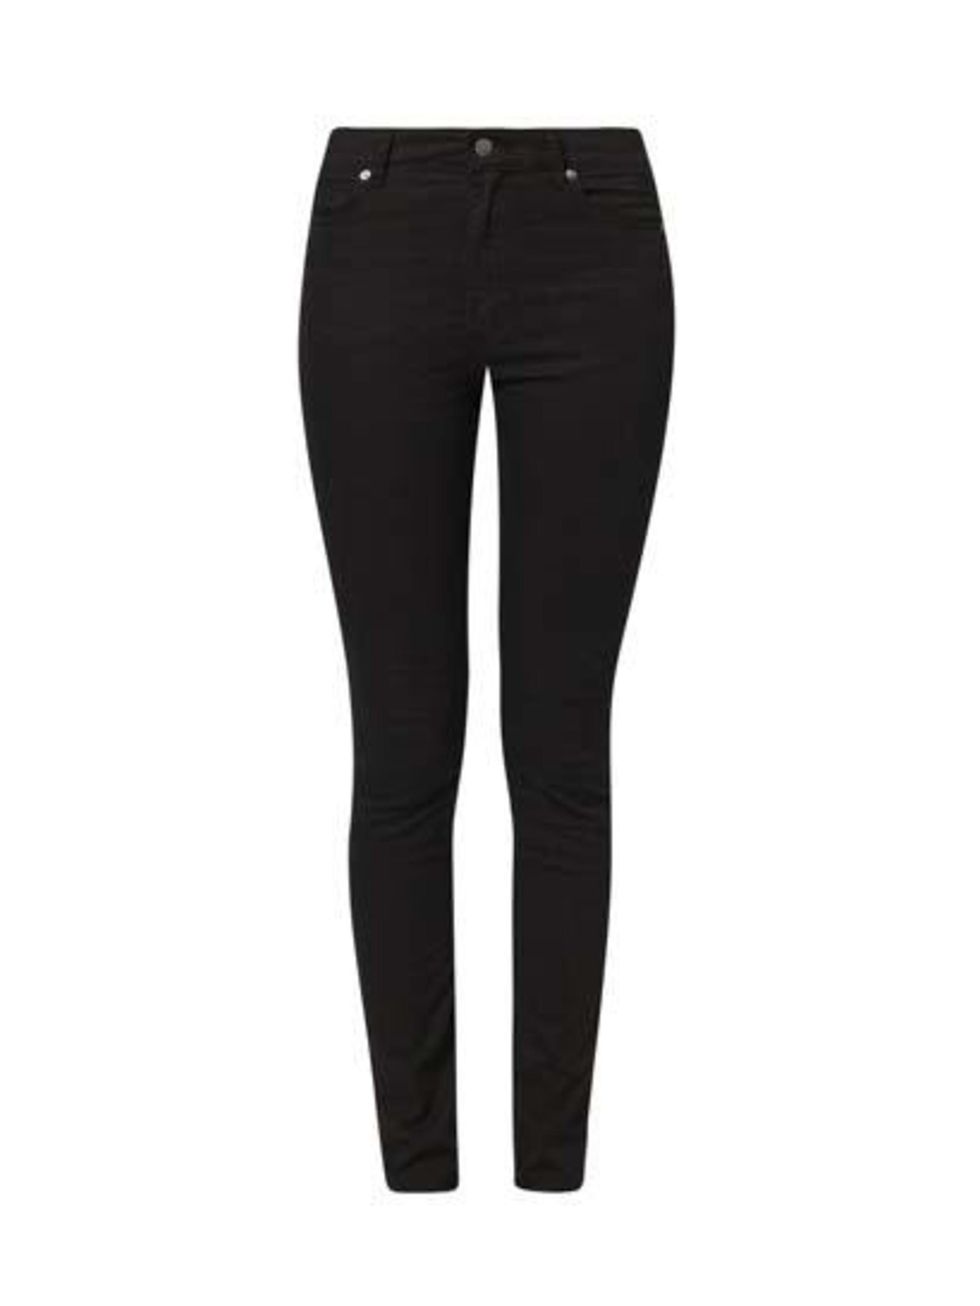 <p>Add black skinny jeans, like these from Cheap Mondays, £42 available at <a href="http://www.zalando.co.uk/cheap-monday-second-skin-very-stretch-slim-fit-jeans-black-ch621a036-955.html">Zalando</a></p>